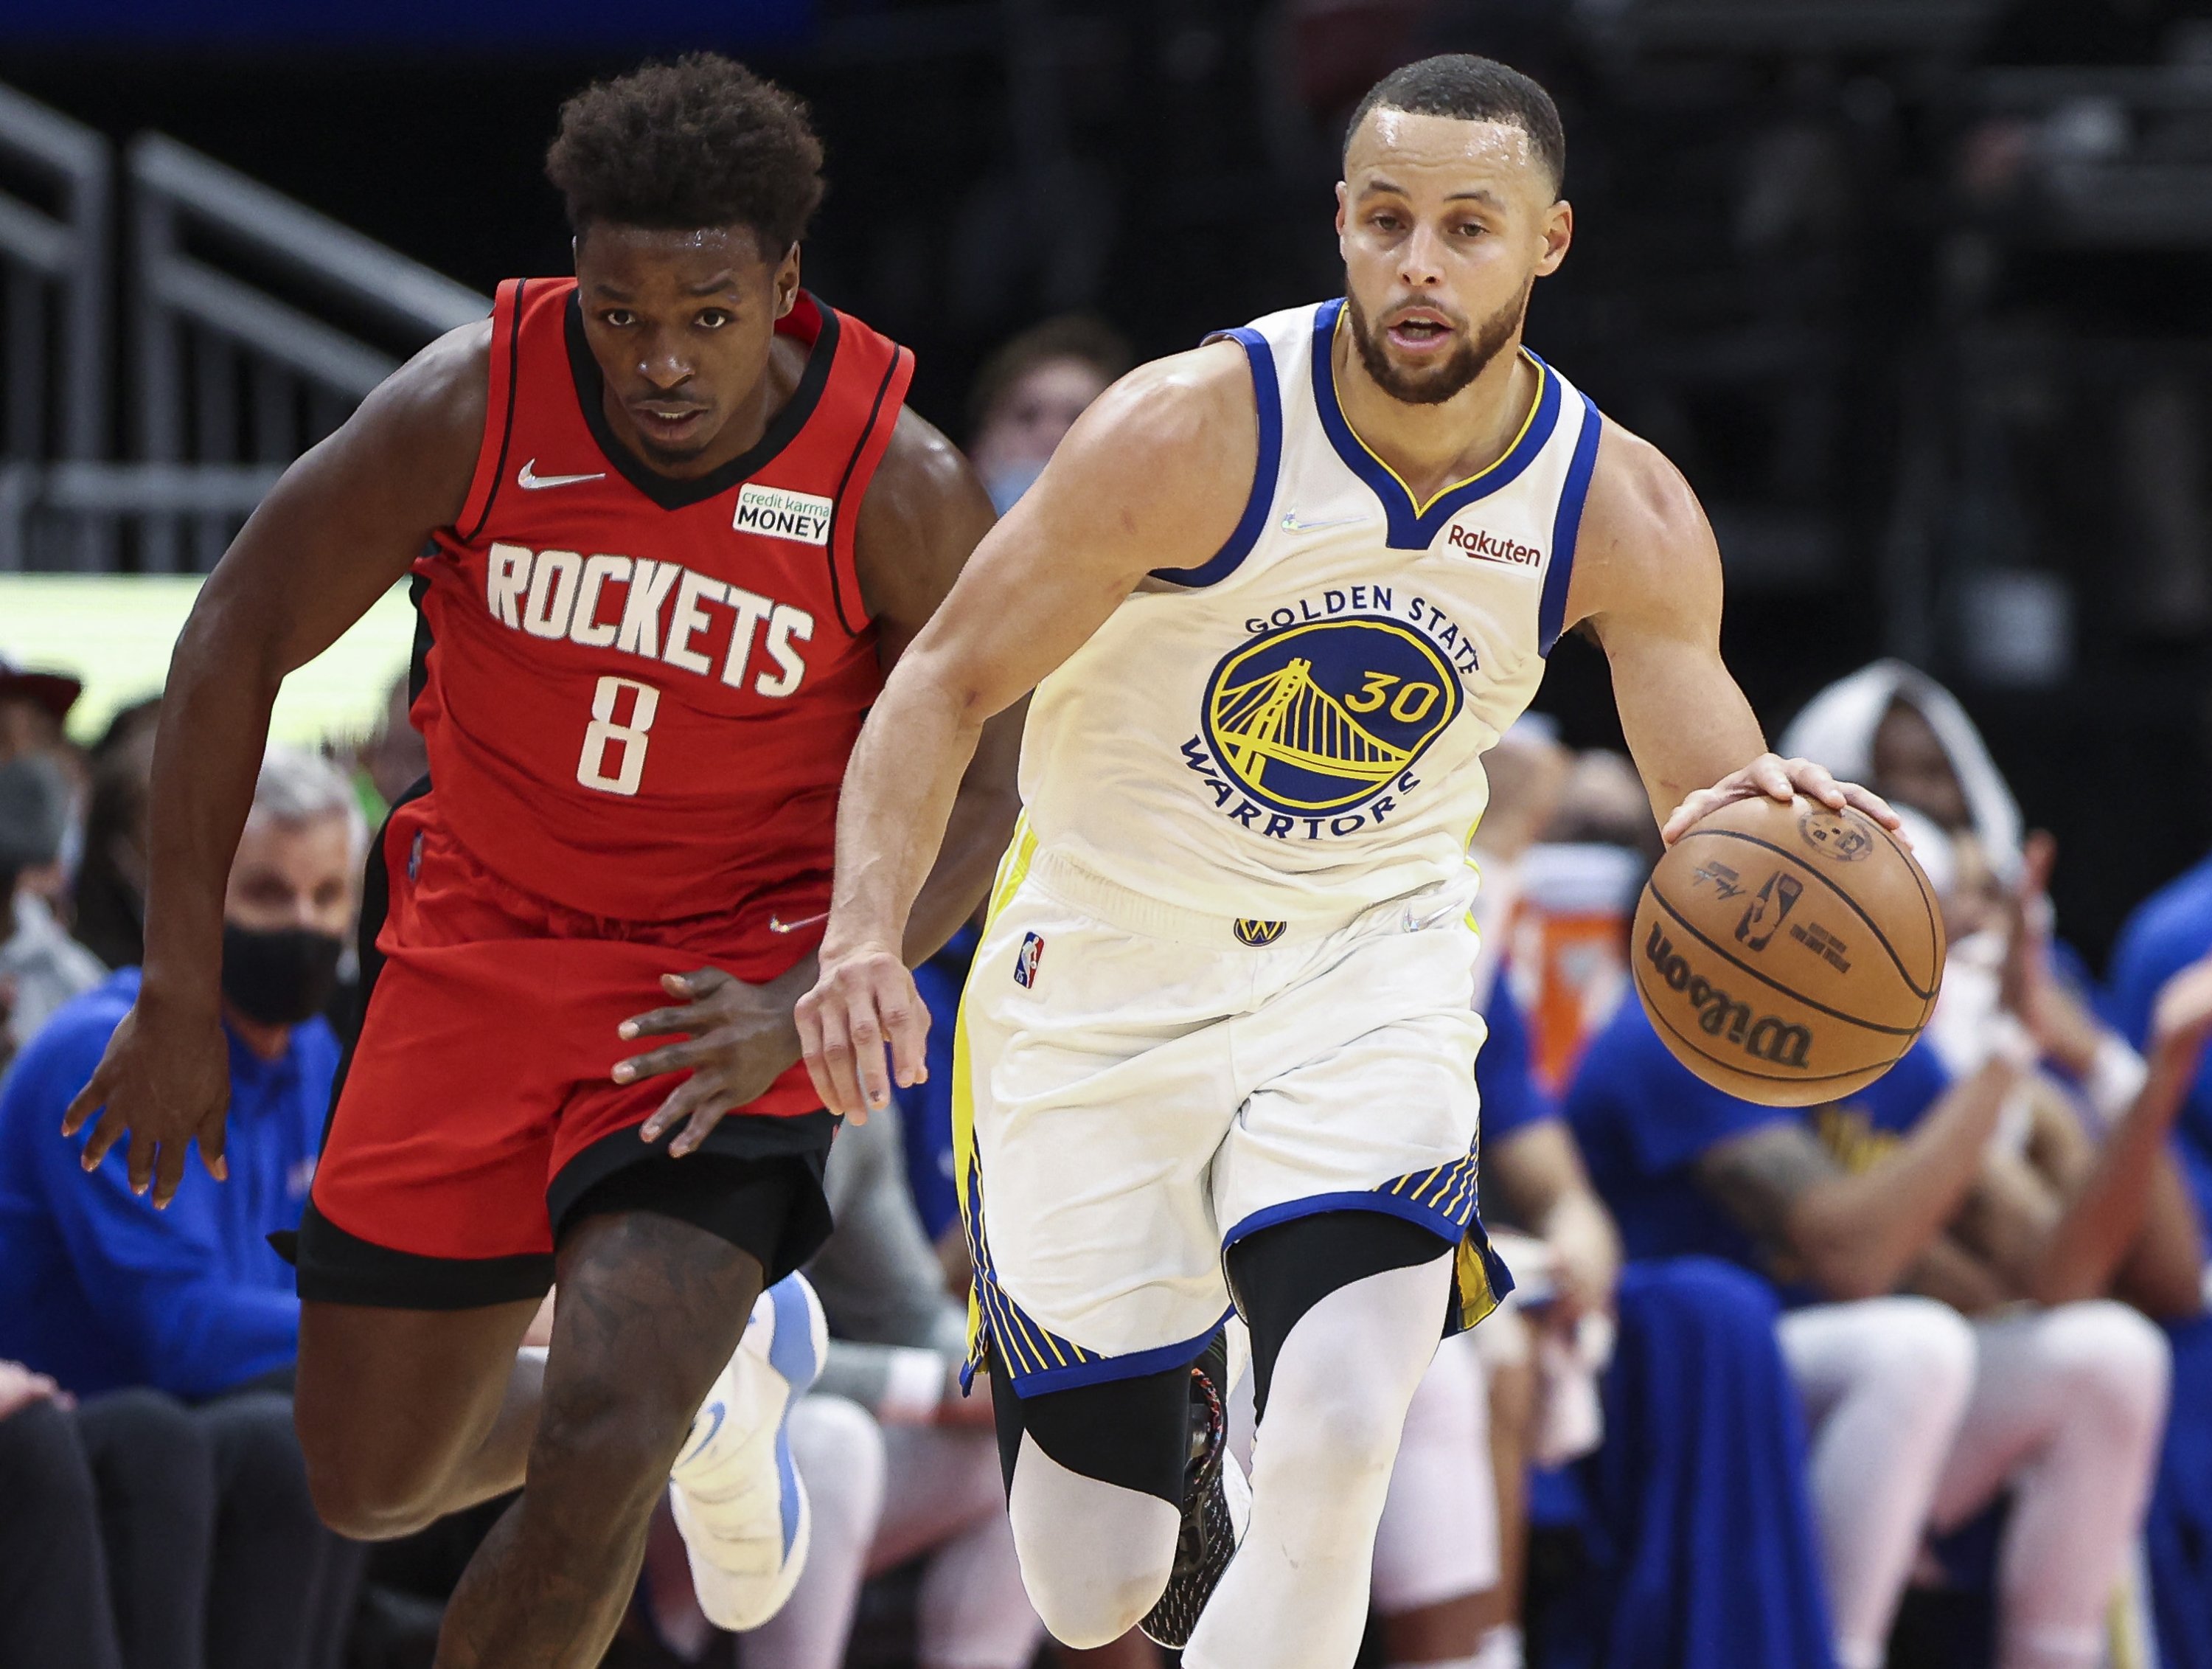 Golden State Warriors guard Stephen Curry (R) drives with the ball as Houston Rockets forward Jae'Sean Tate defends during an NBA game, Houston, Texas, U.S., Jan 31, 2022. (Reuters Photo)